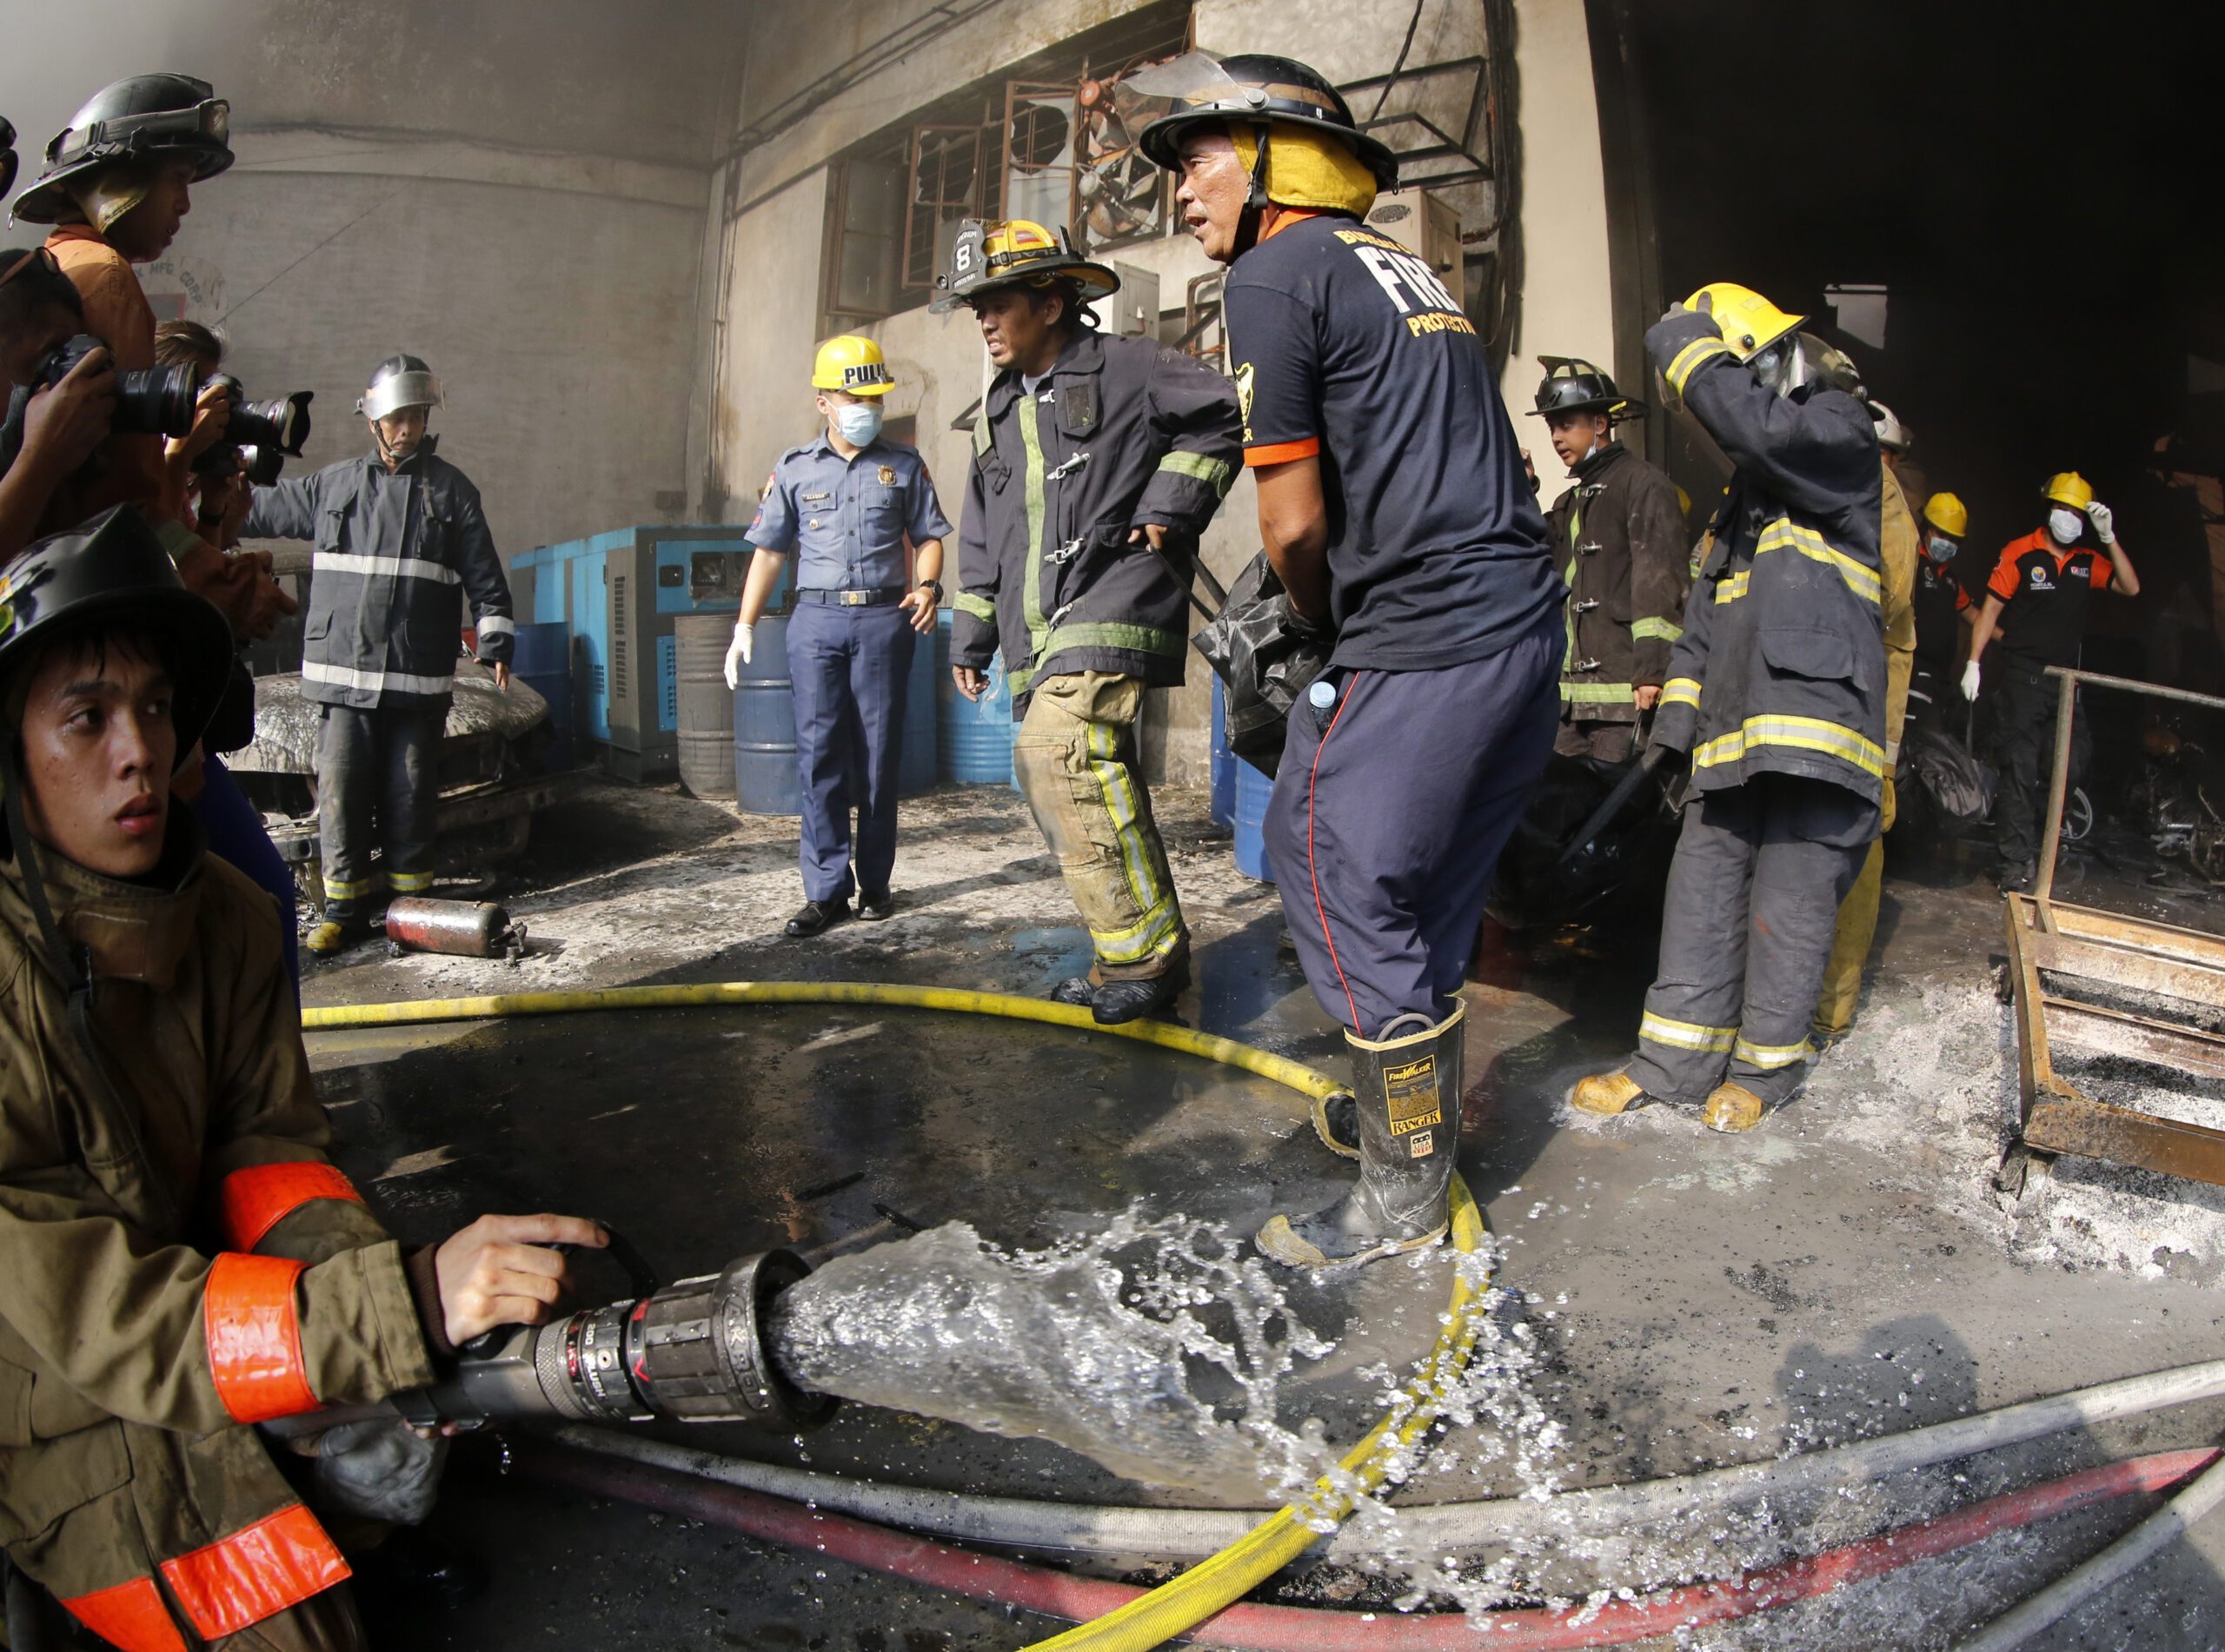 73 out of 74 Kentex fire victims identified – PNP